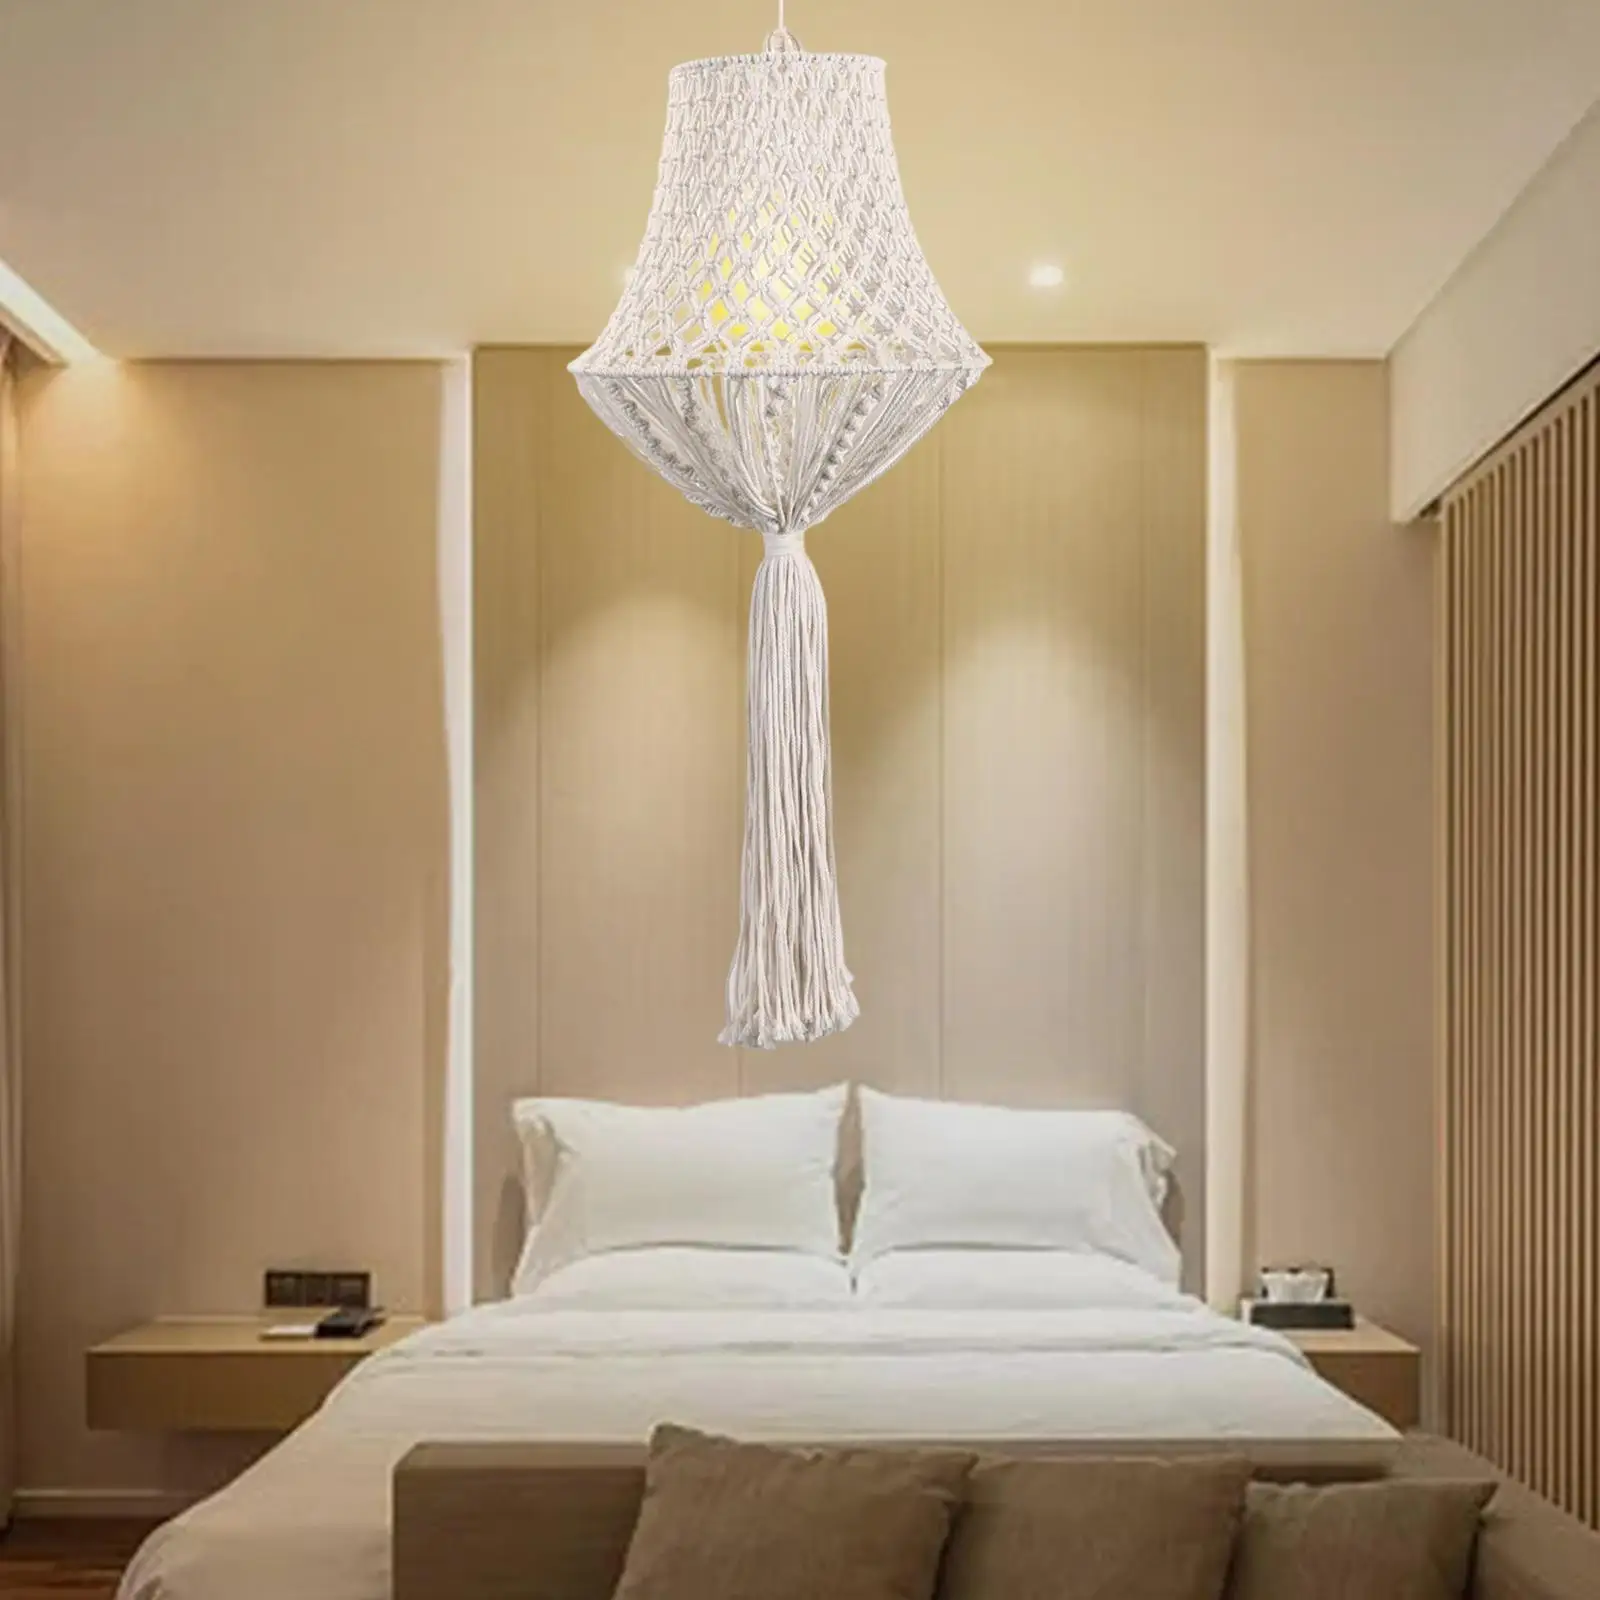 Nordic Macrame Lamp Shade Handwoven Light Shade Fitting Hanging Pendant Lamp Cover Chandelier Lampshade for Bedroom Home Decor